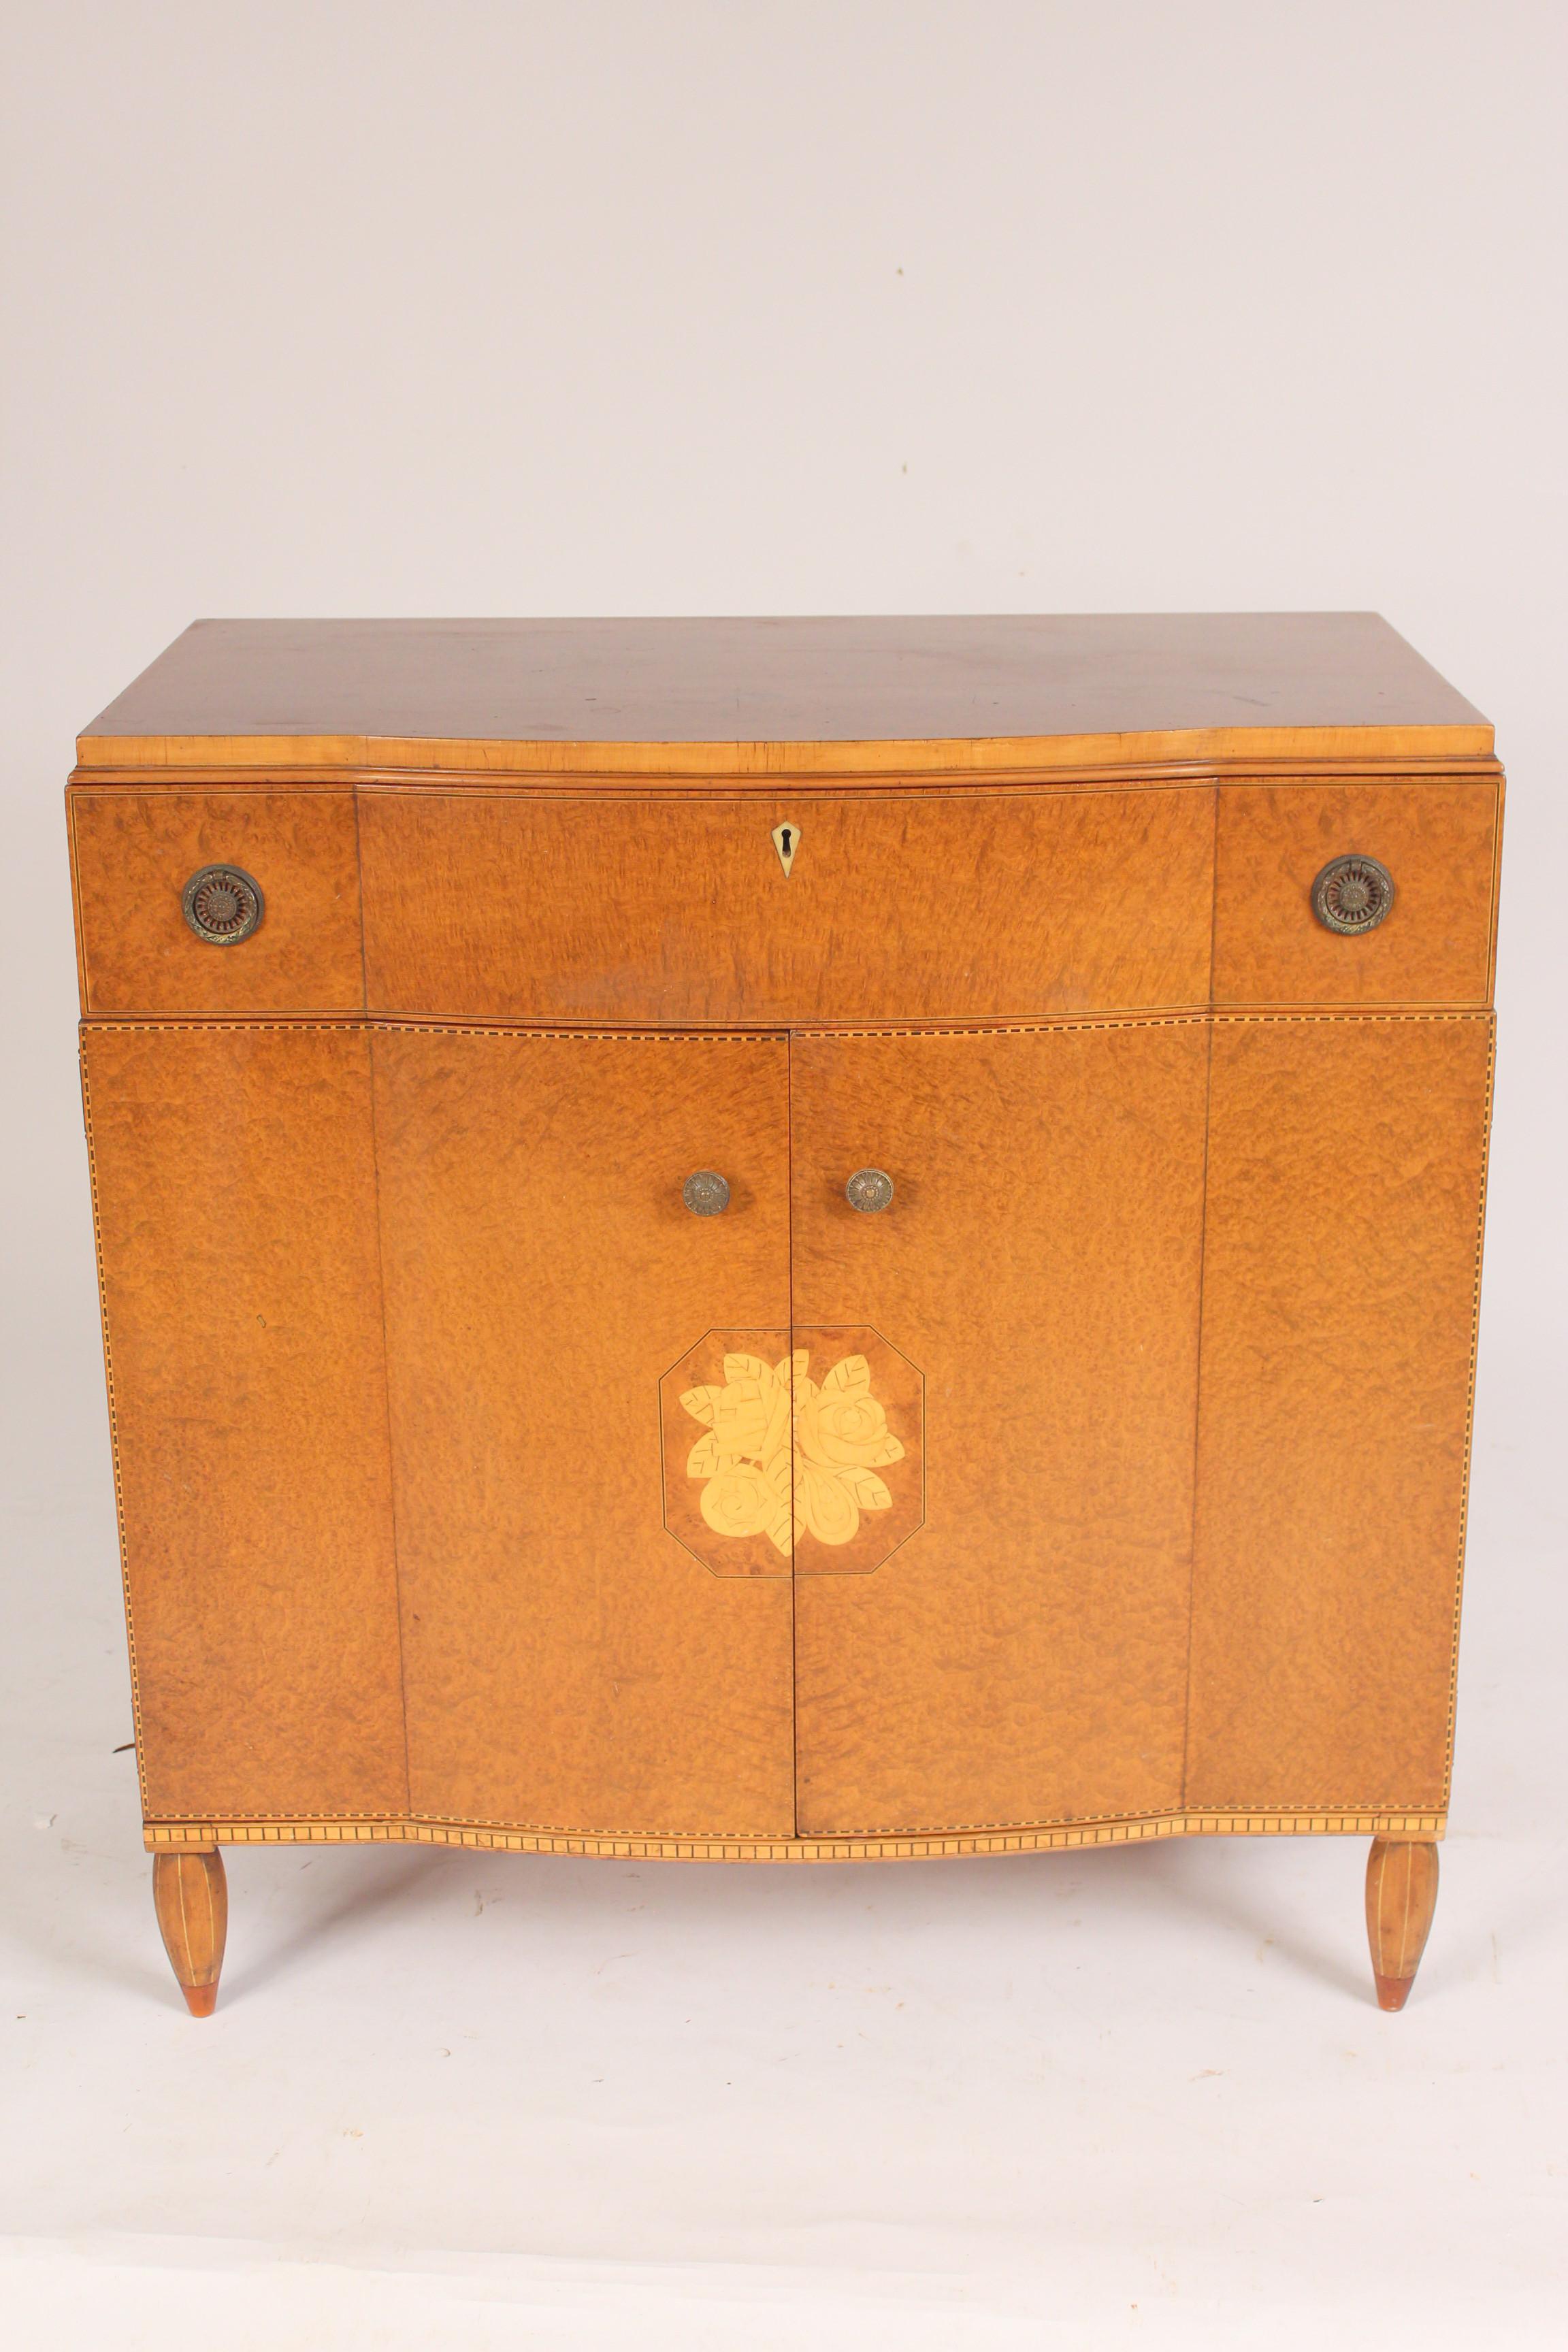 Art Moderne burled ash cabinet / chest of drawers, circa 1930-1950.